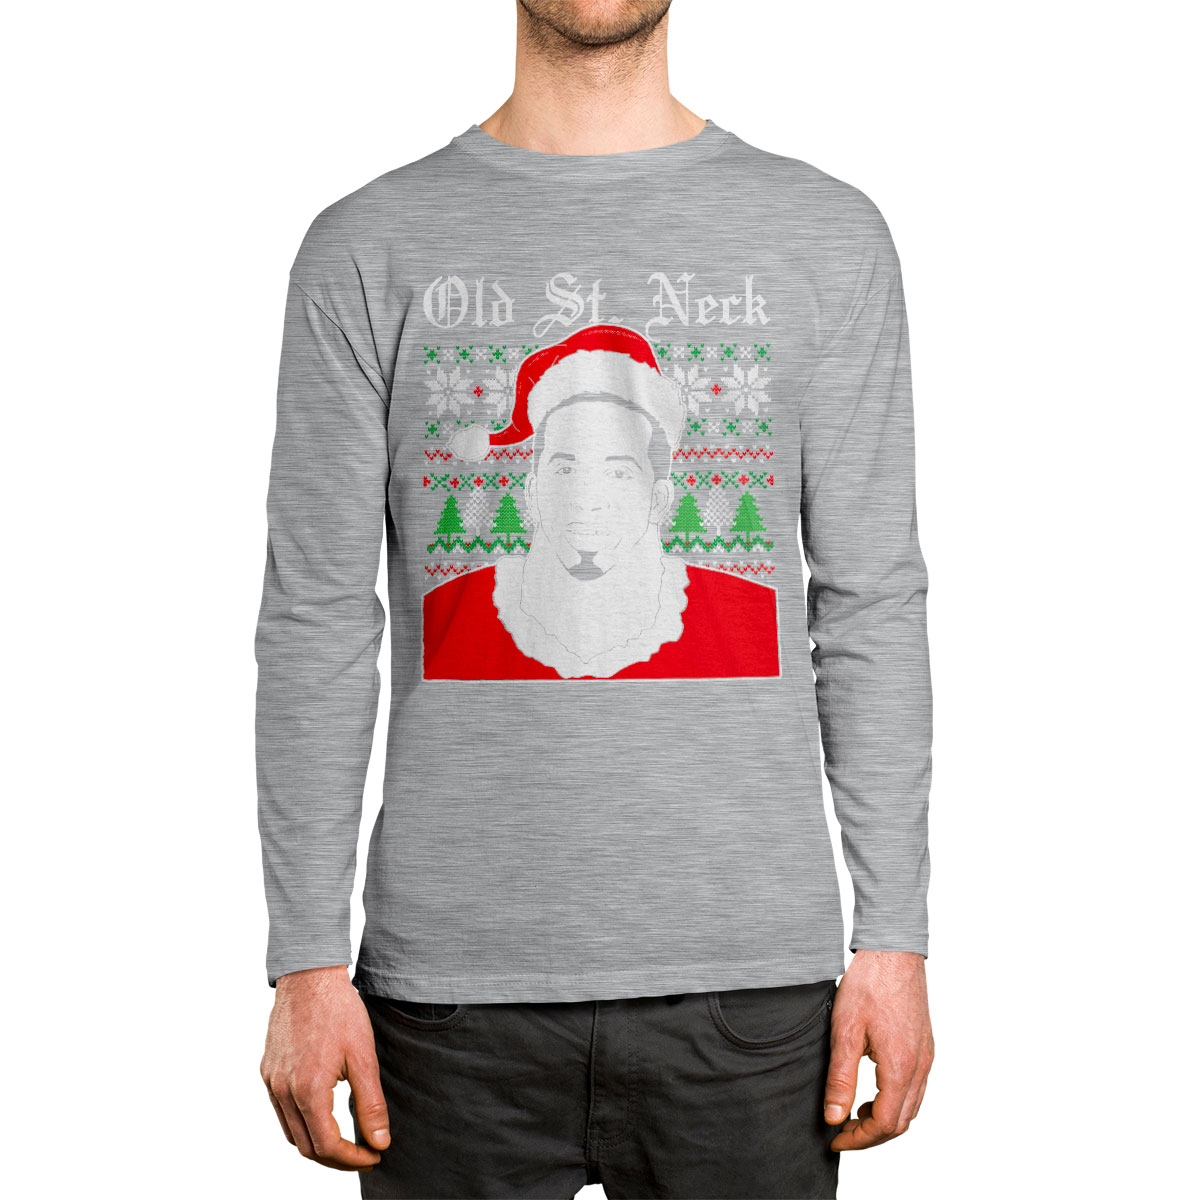 Old St Neck Funny Meme Ugly Christmas Sweater Long Sleeve ...